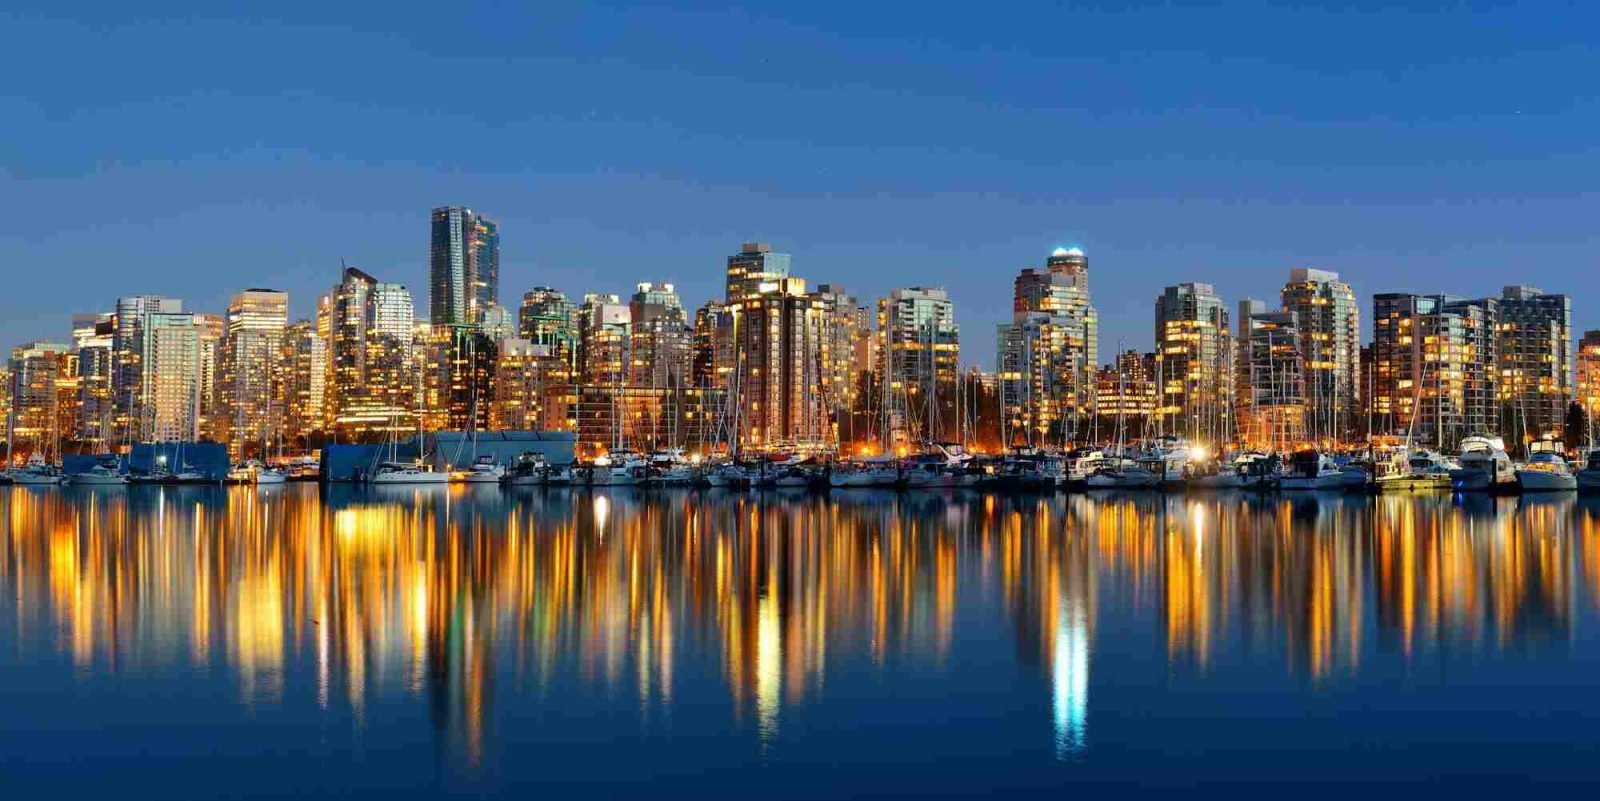 20230926150543 fpdl.in vancouver downtown architecture boat with water reflections dusk panorama 649448 2636 full 1